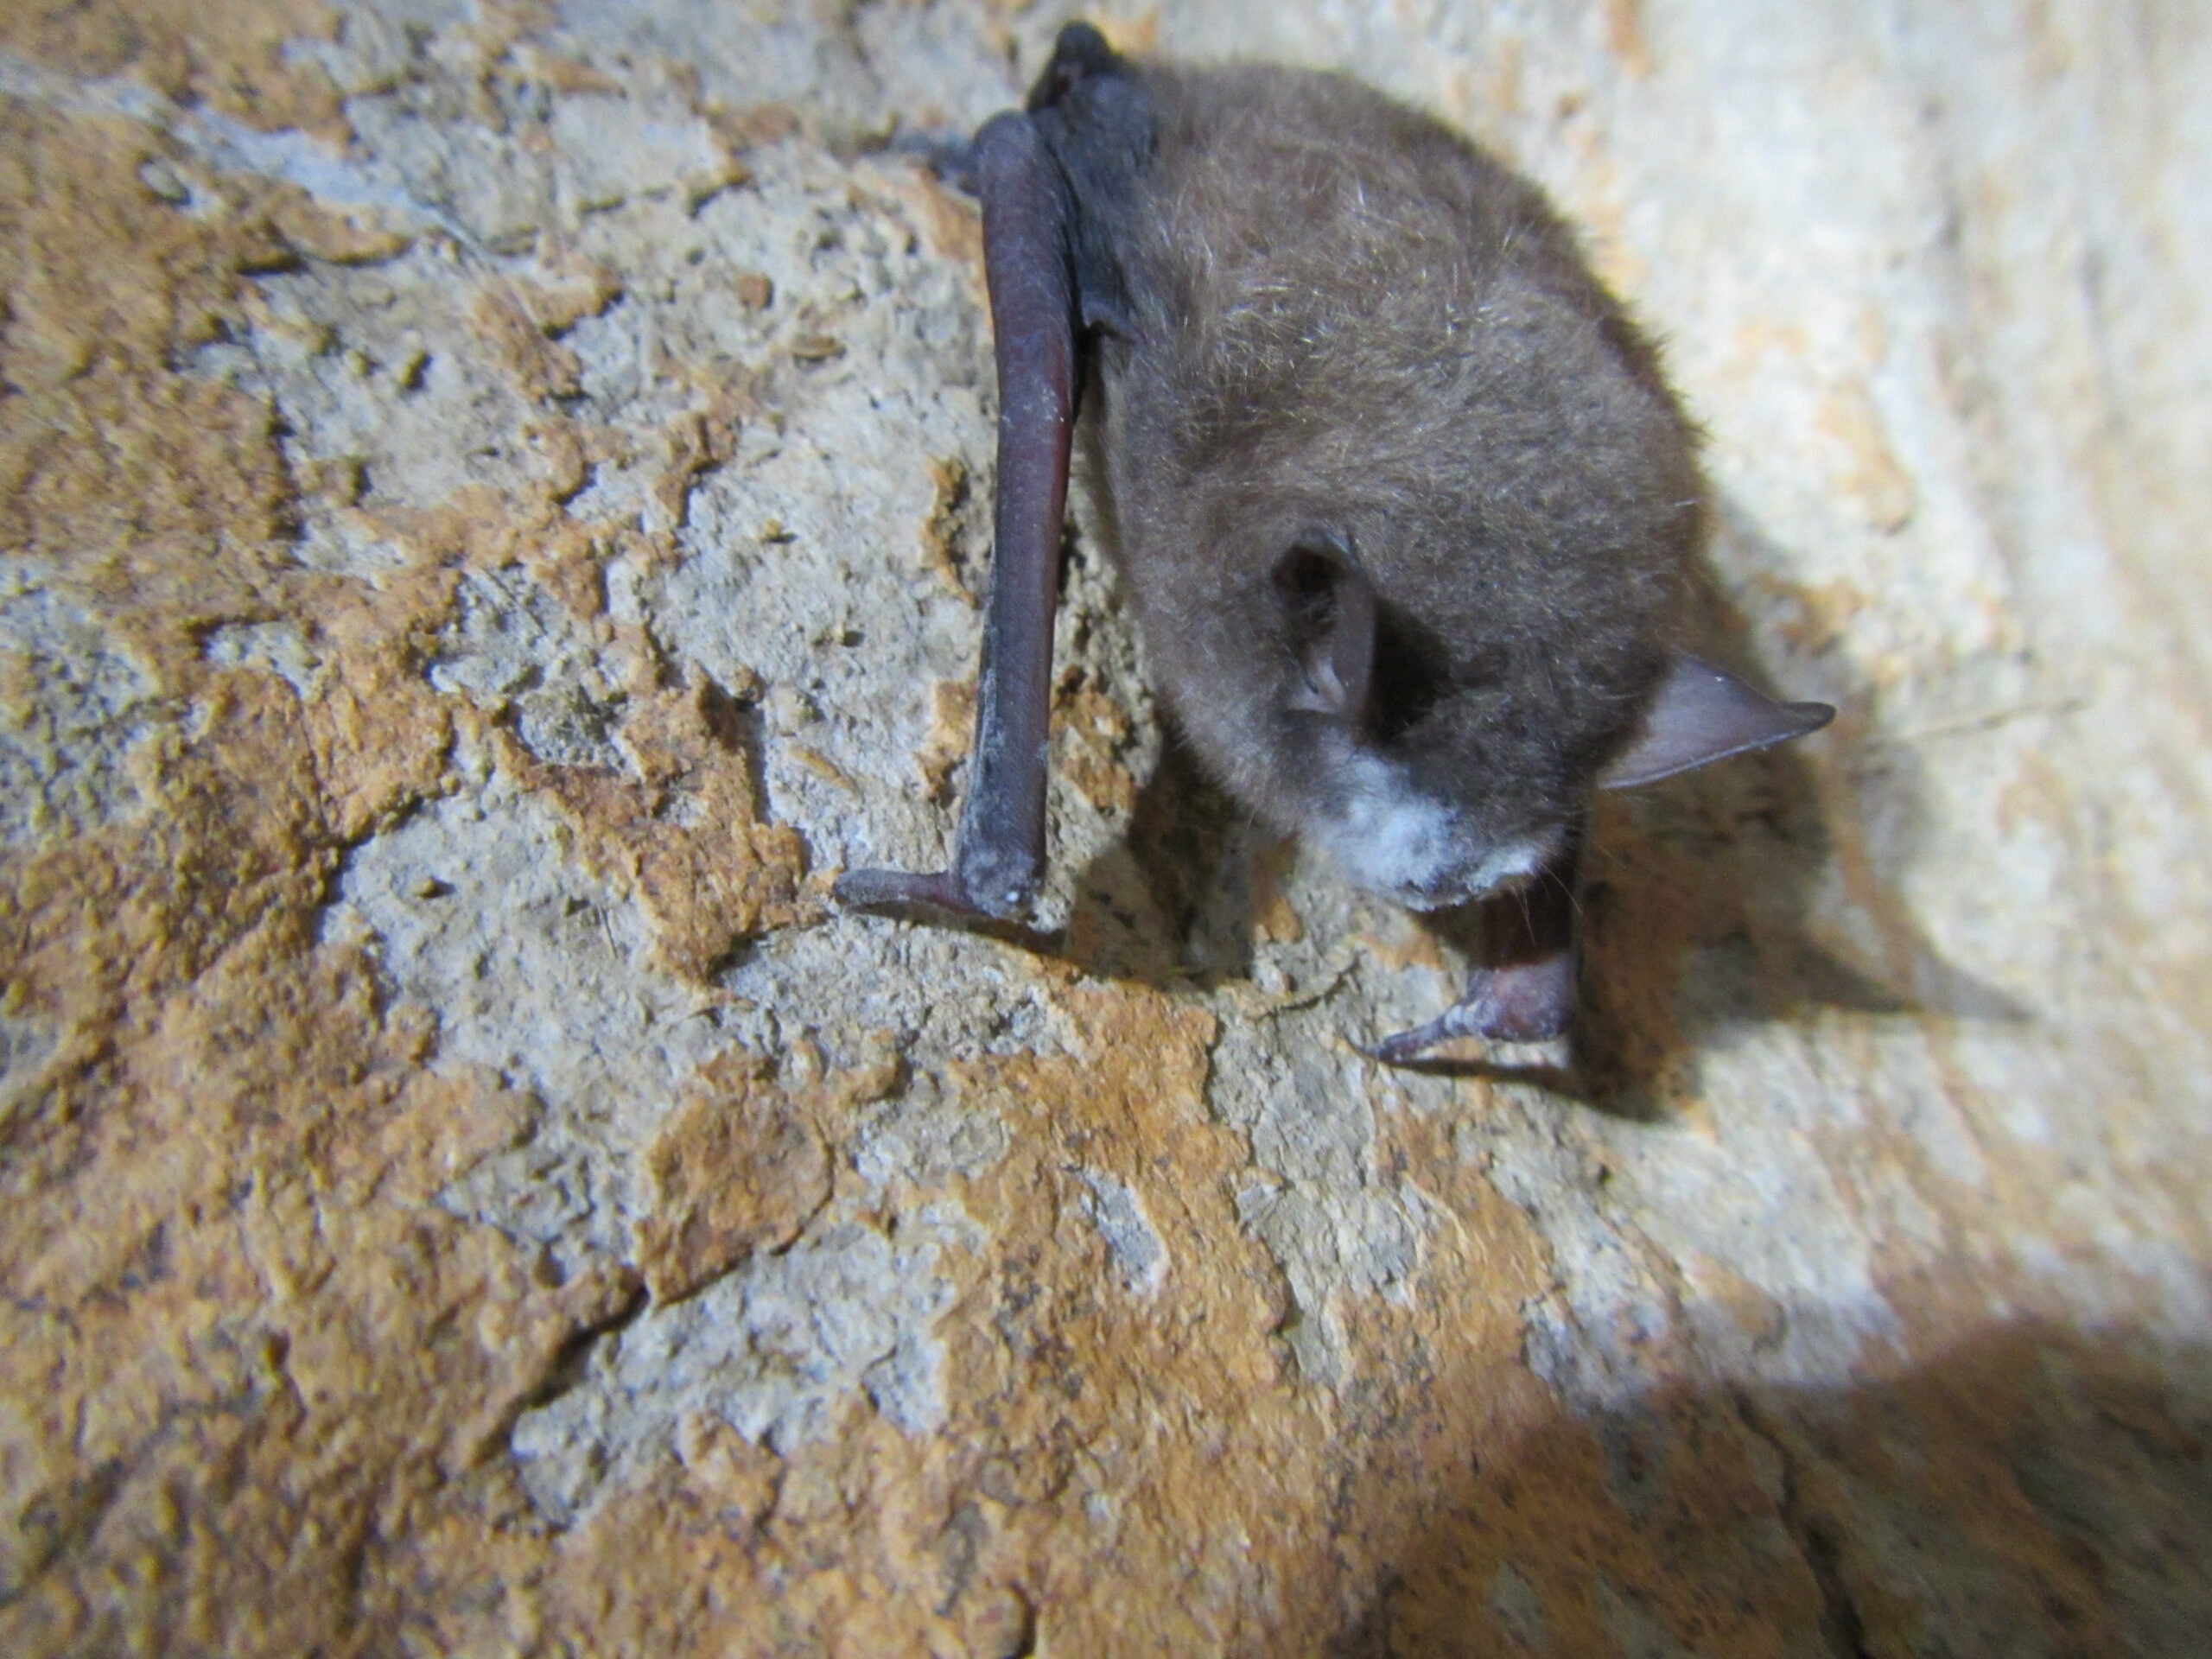 Tricolored bats are imperiled by deadly fungal disease